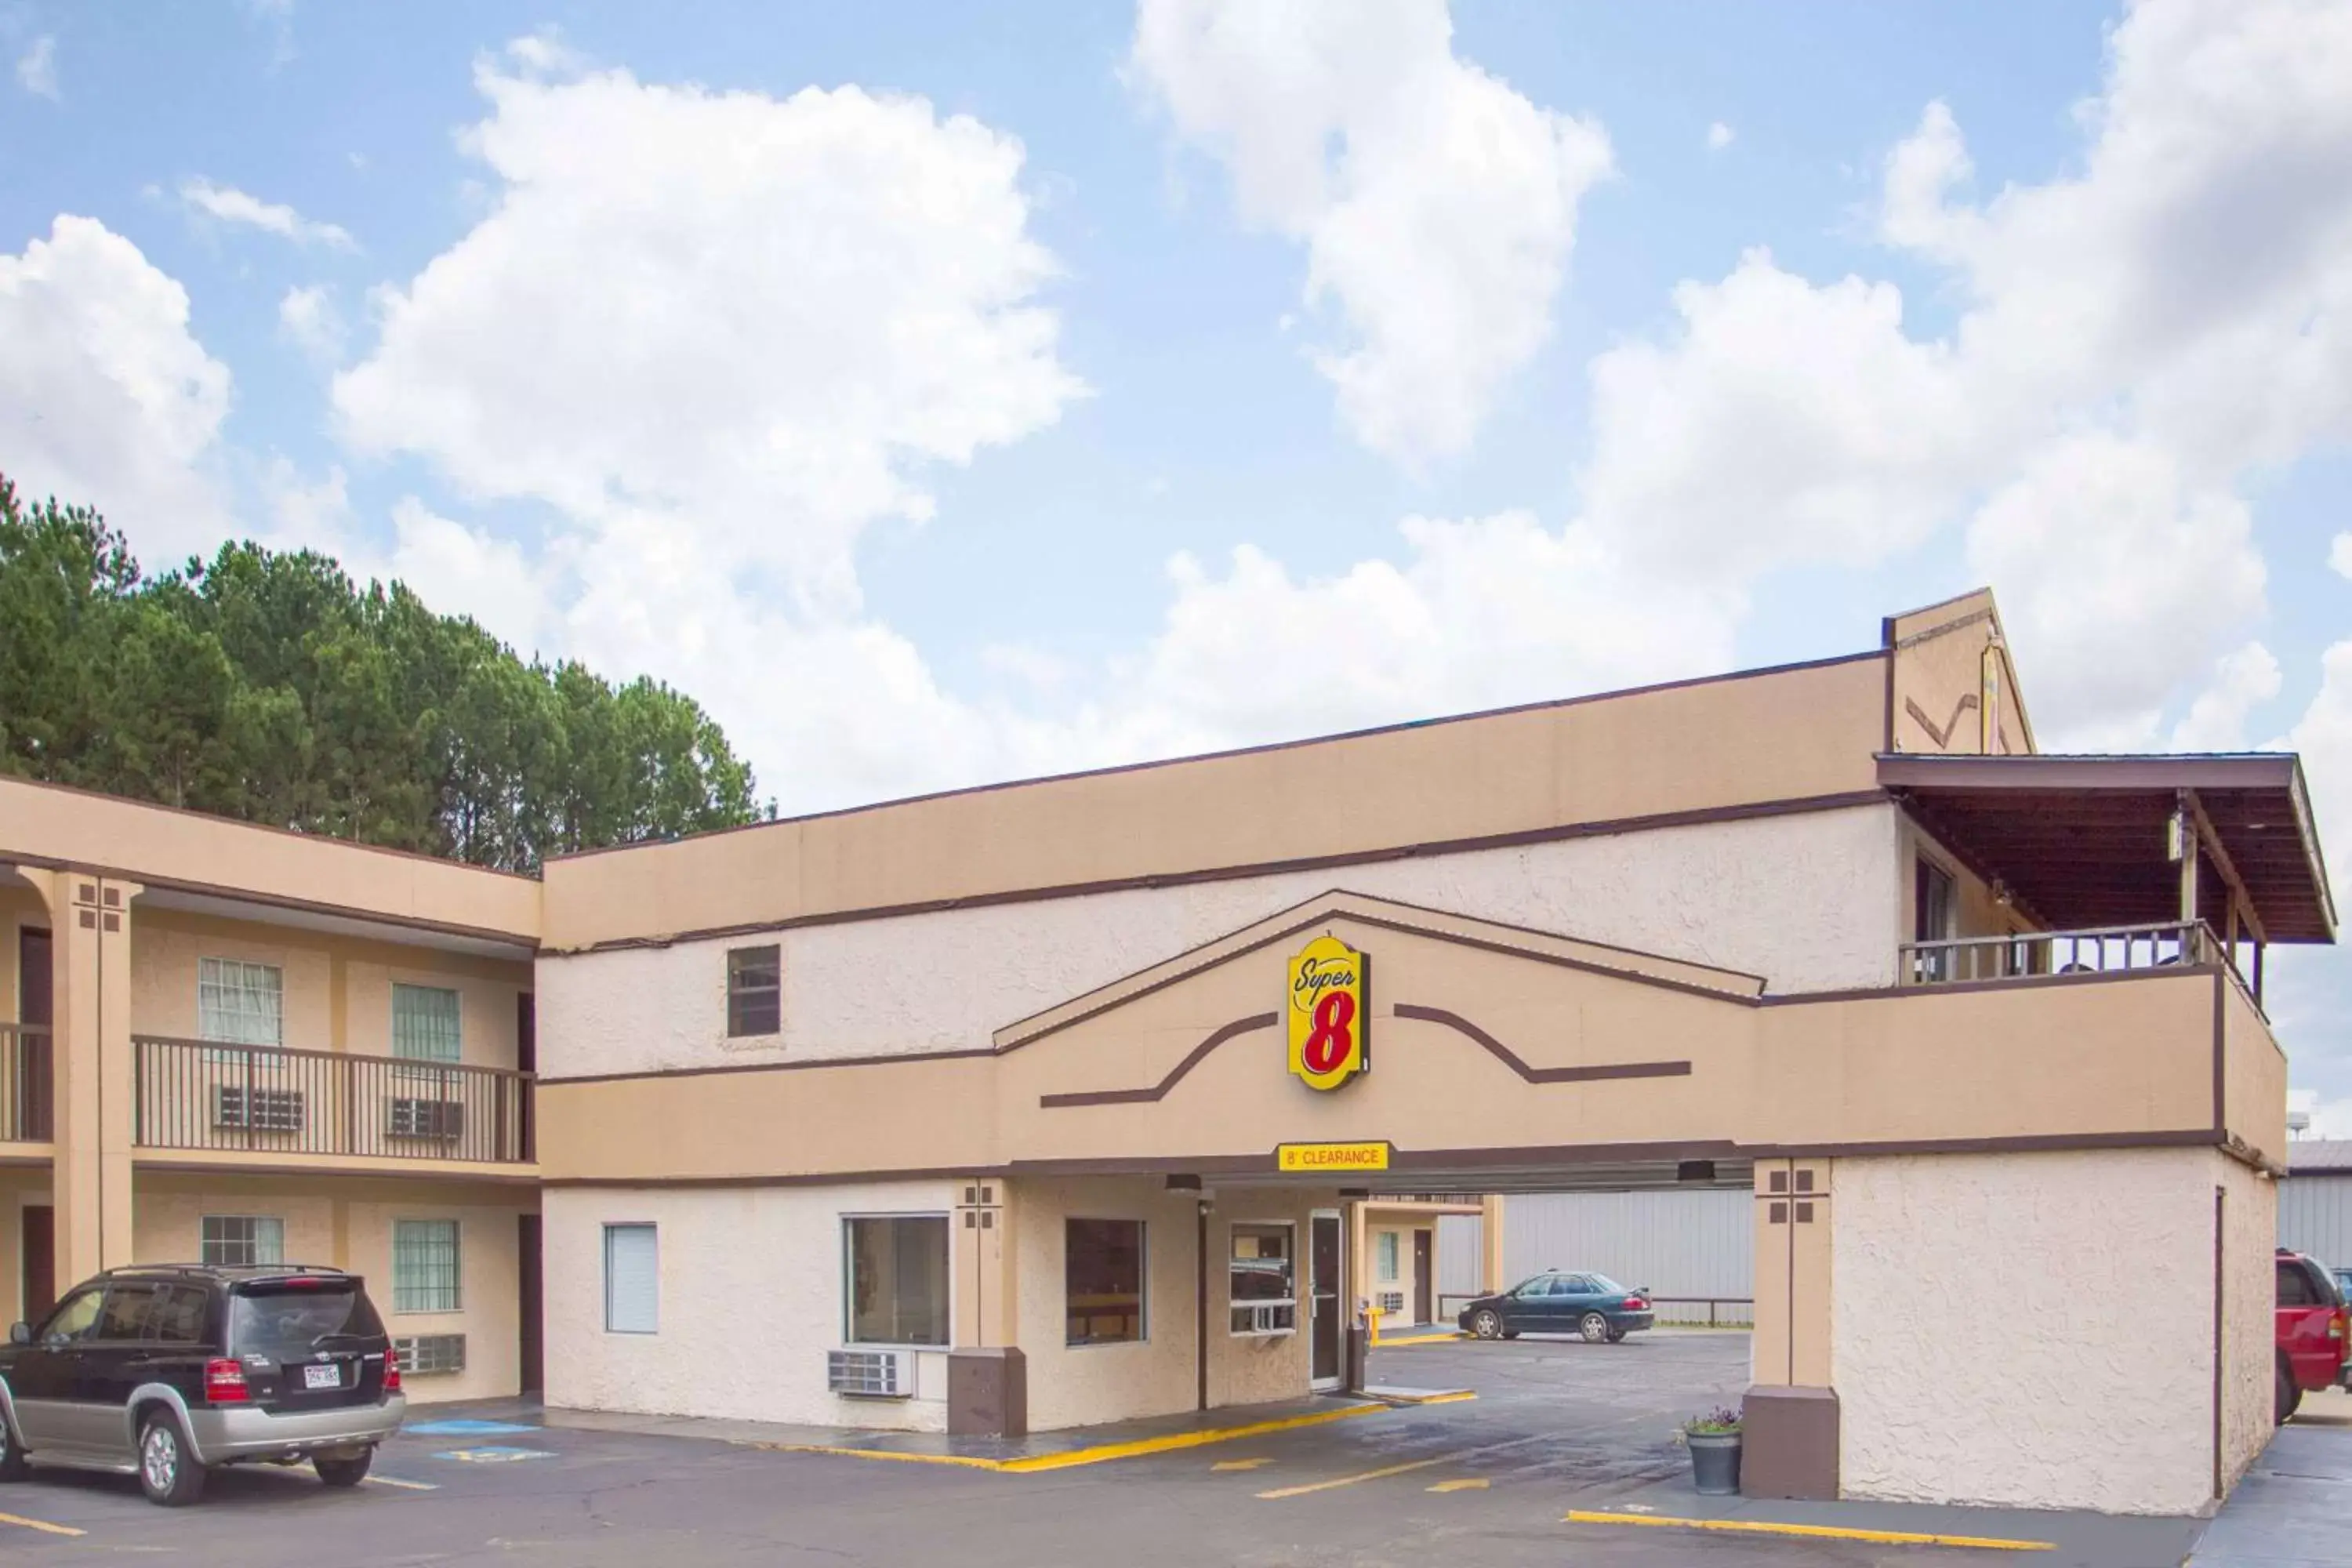 Property Building in Super 8 by Wyndham Monticello AR